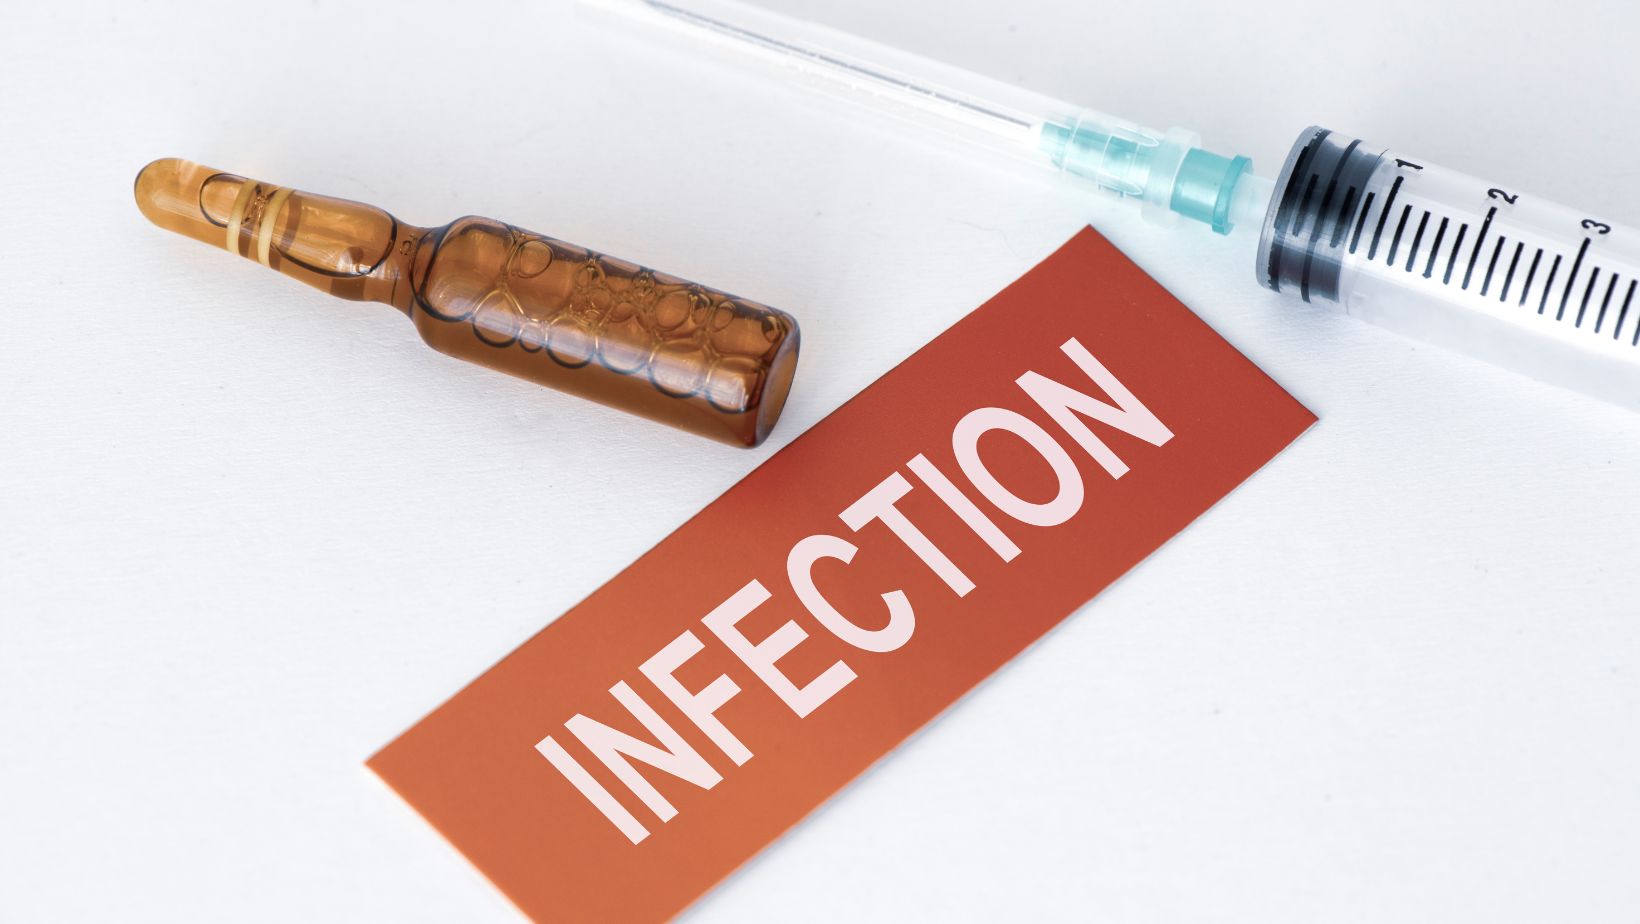 which behavior is most likely to carry risk of serious infection